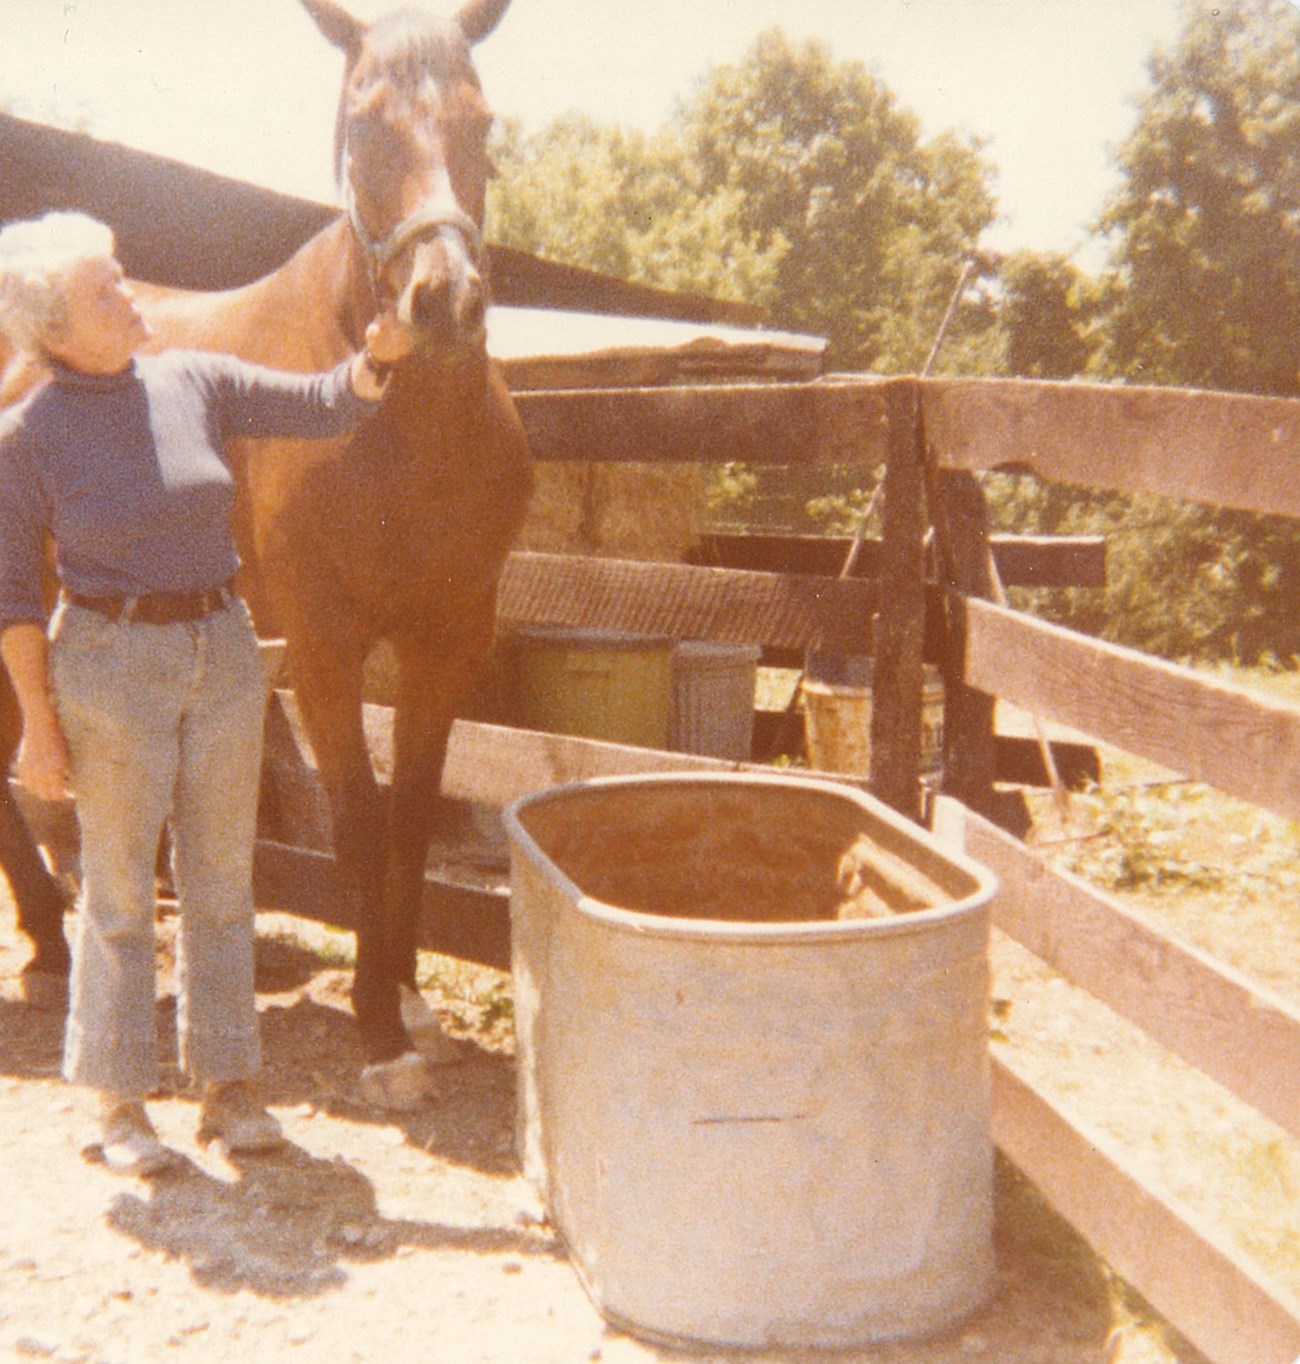 A woman stands beside a water trough holding a brown horse that is much taller than herself. They are inside a fenced area with a low farm building in the background.